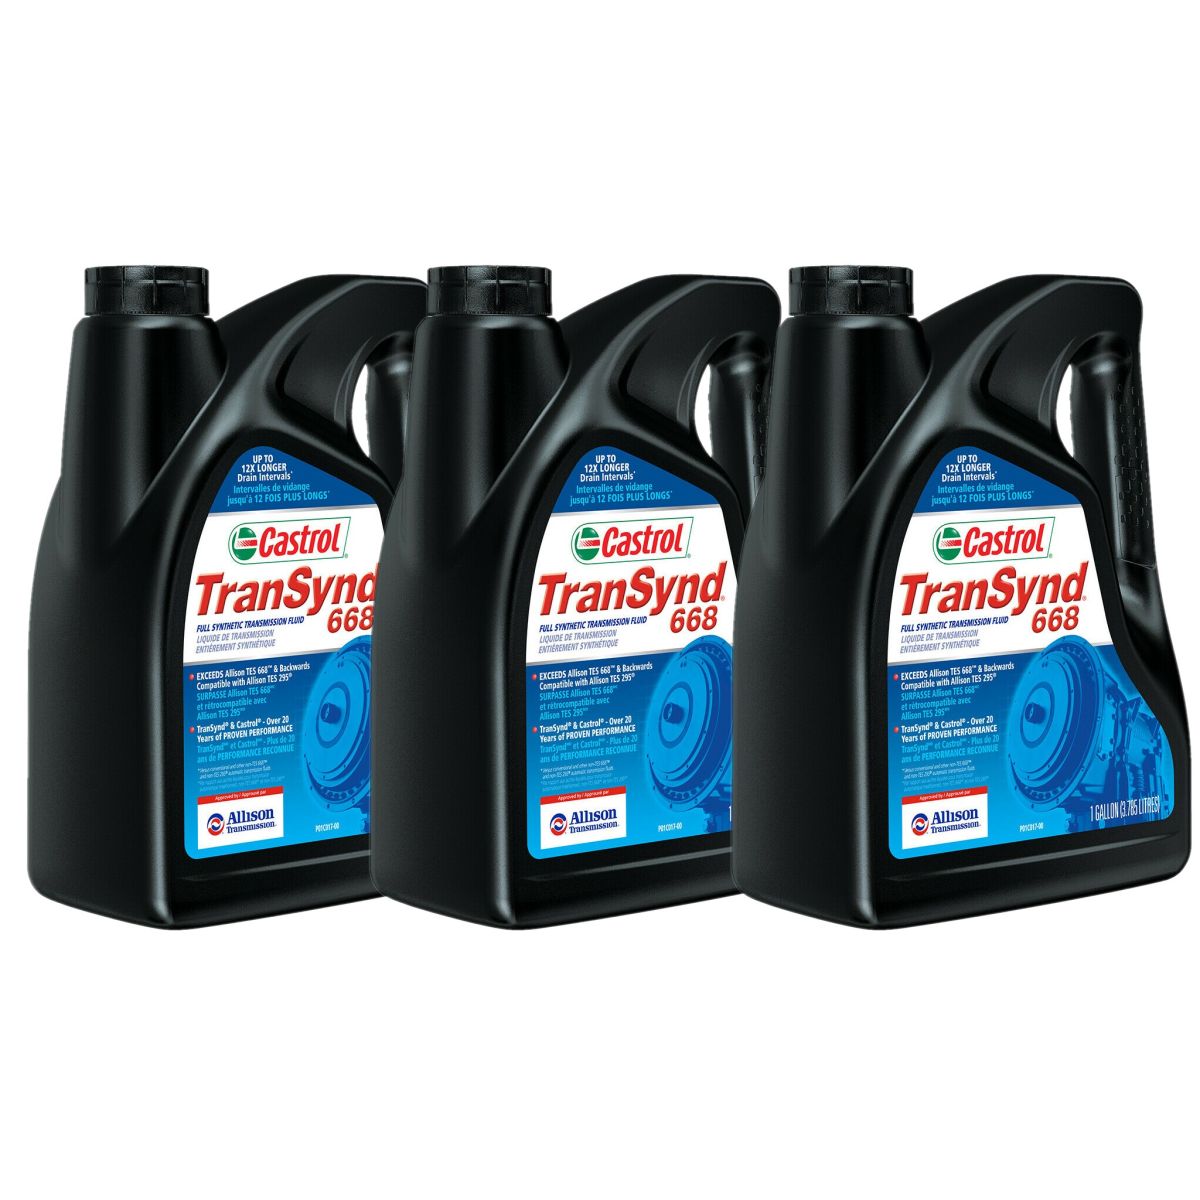 Castrol - 3 Gallons Allison Transynd TES 668 On-Highway Full Synthetic Transmission Fluid